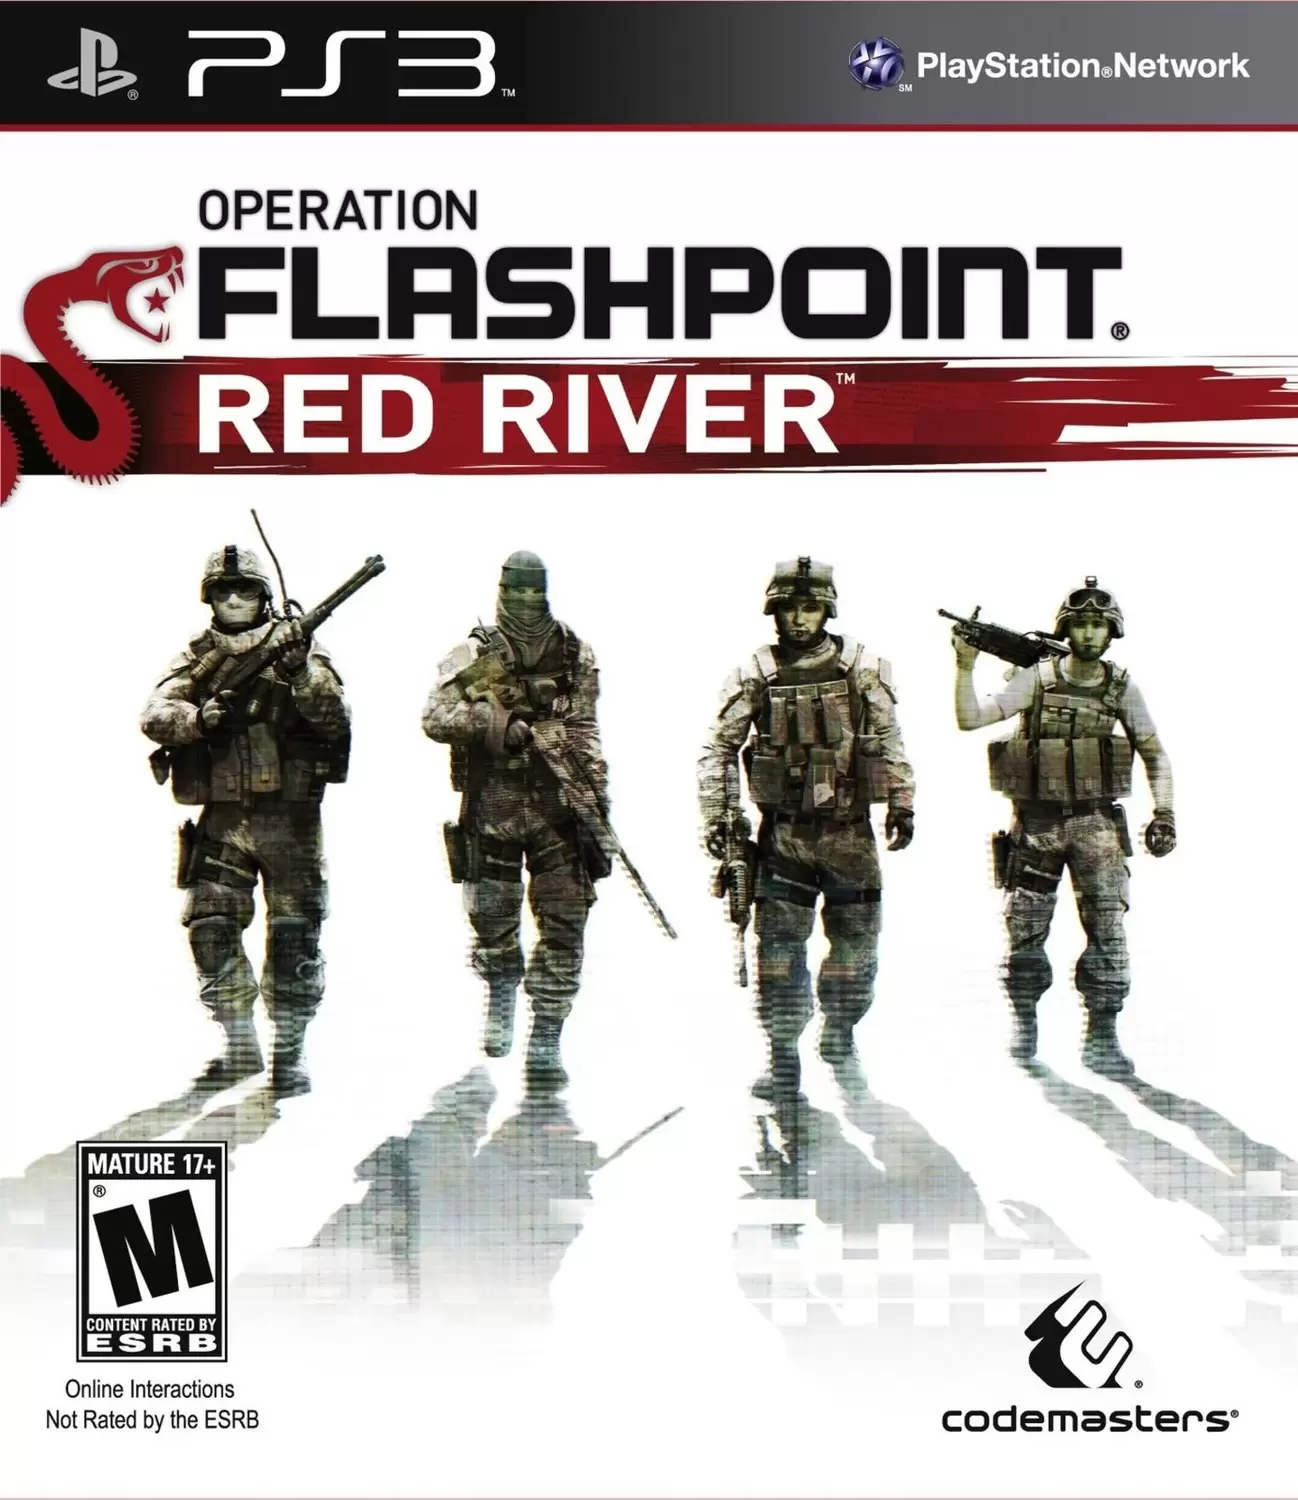 PS3 Games - Operation Flashpoint: Red River